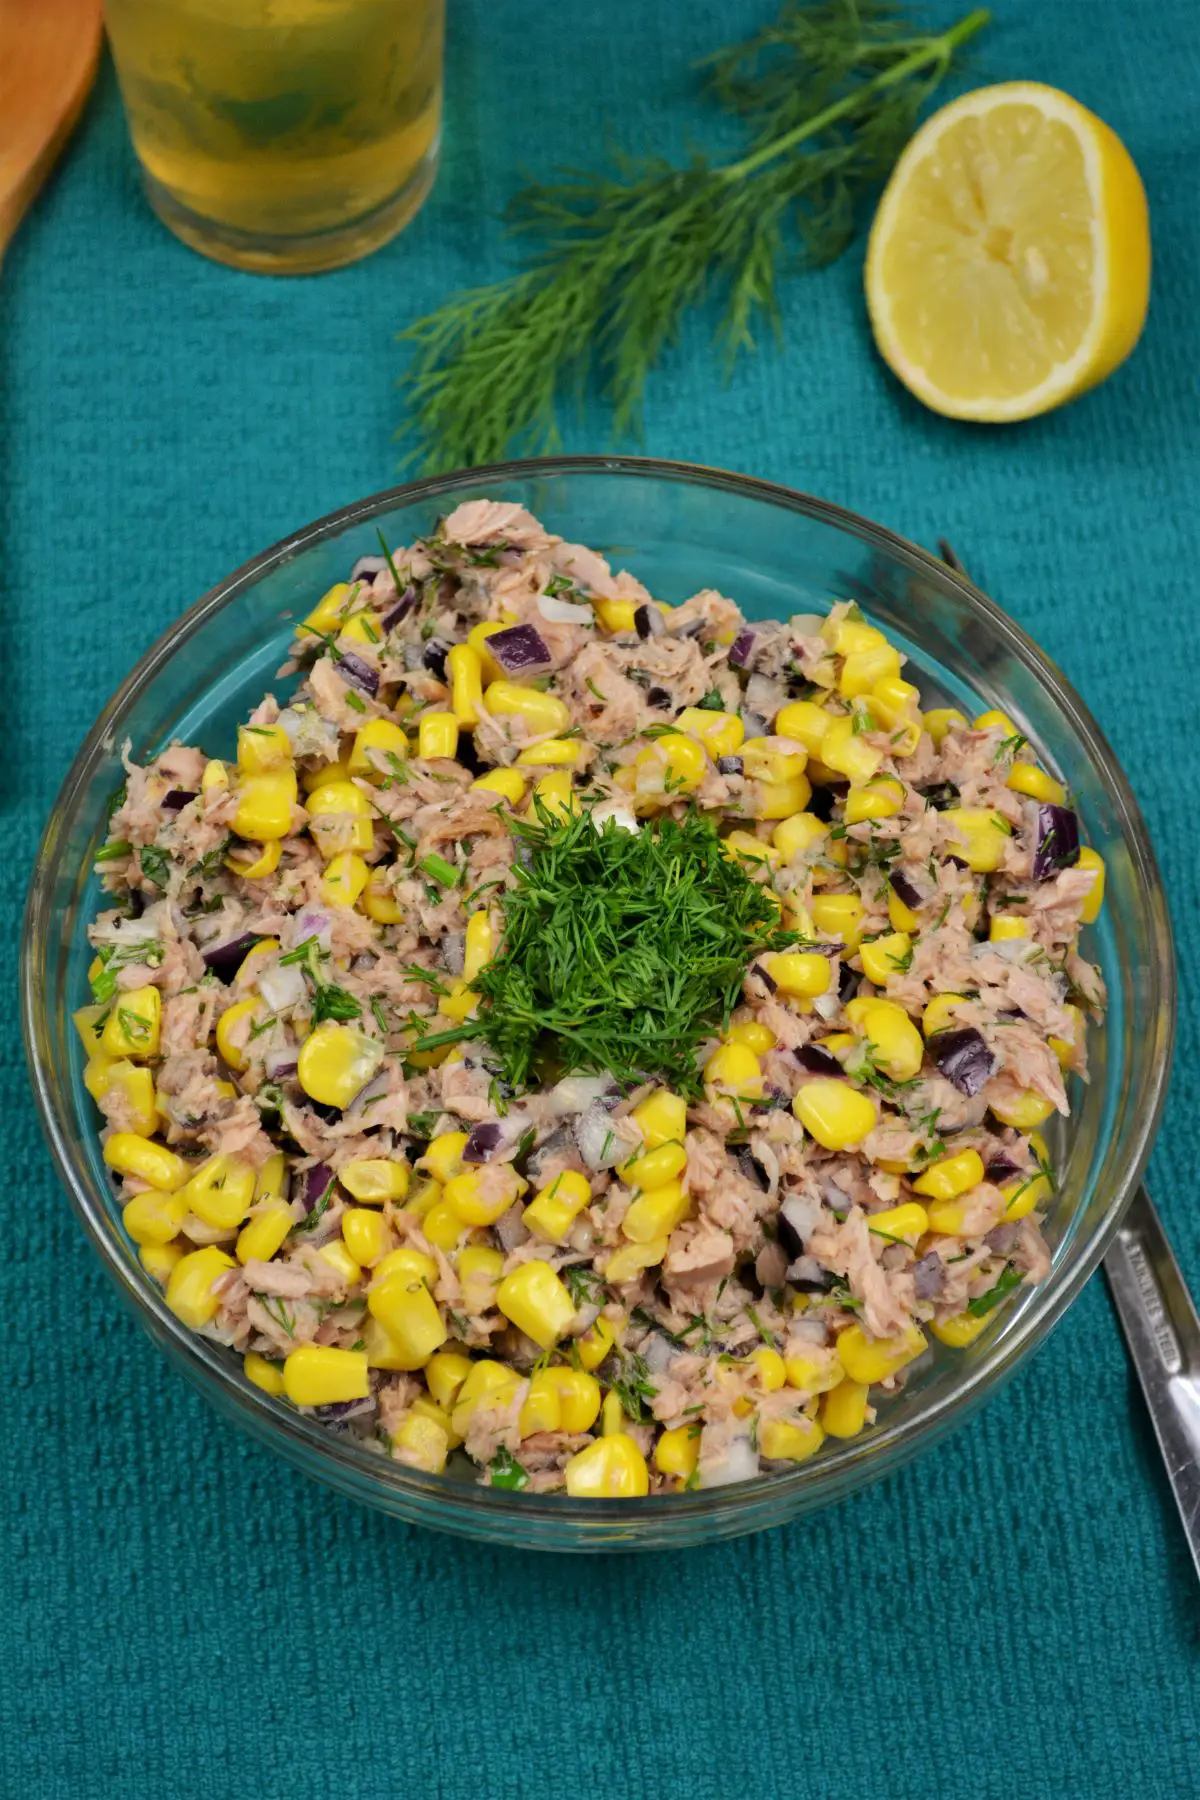 Tuna Corn Salad Recipe-Served in a Bowl, With Lemon and a Glass of Beer